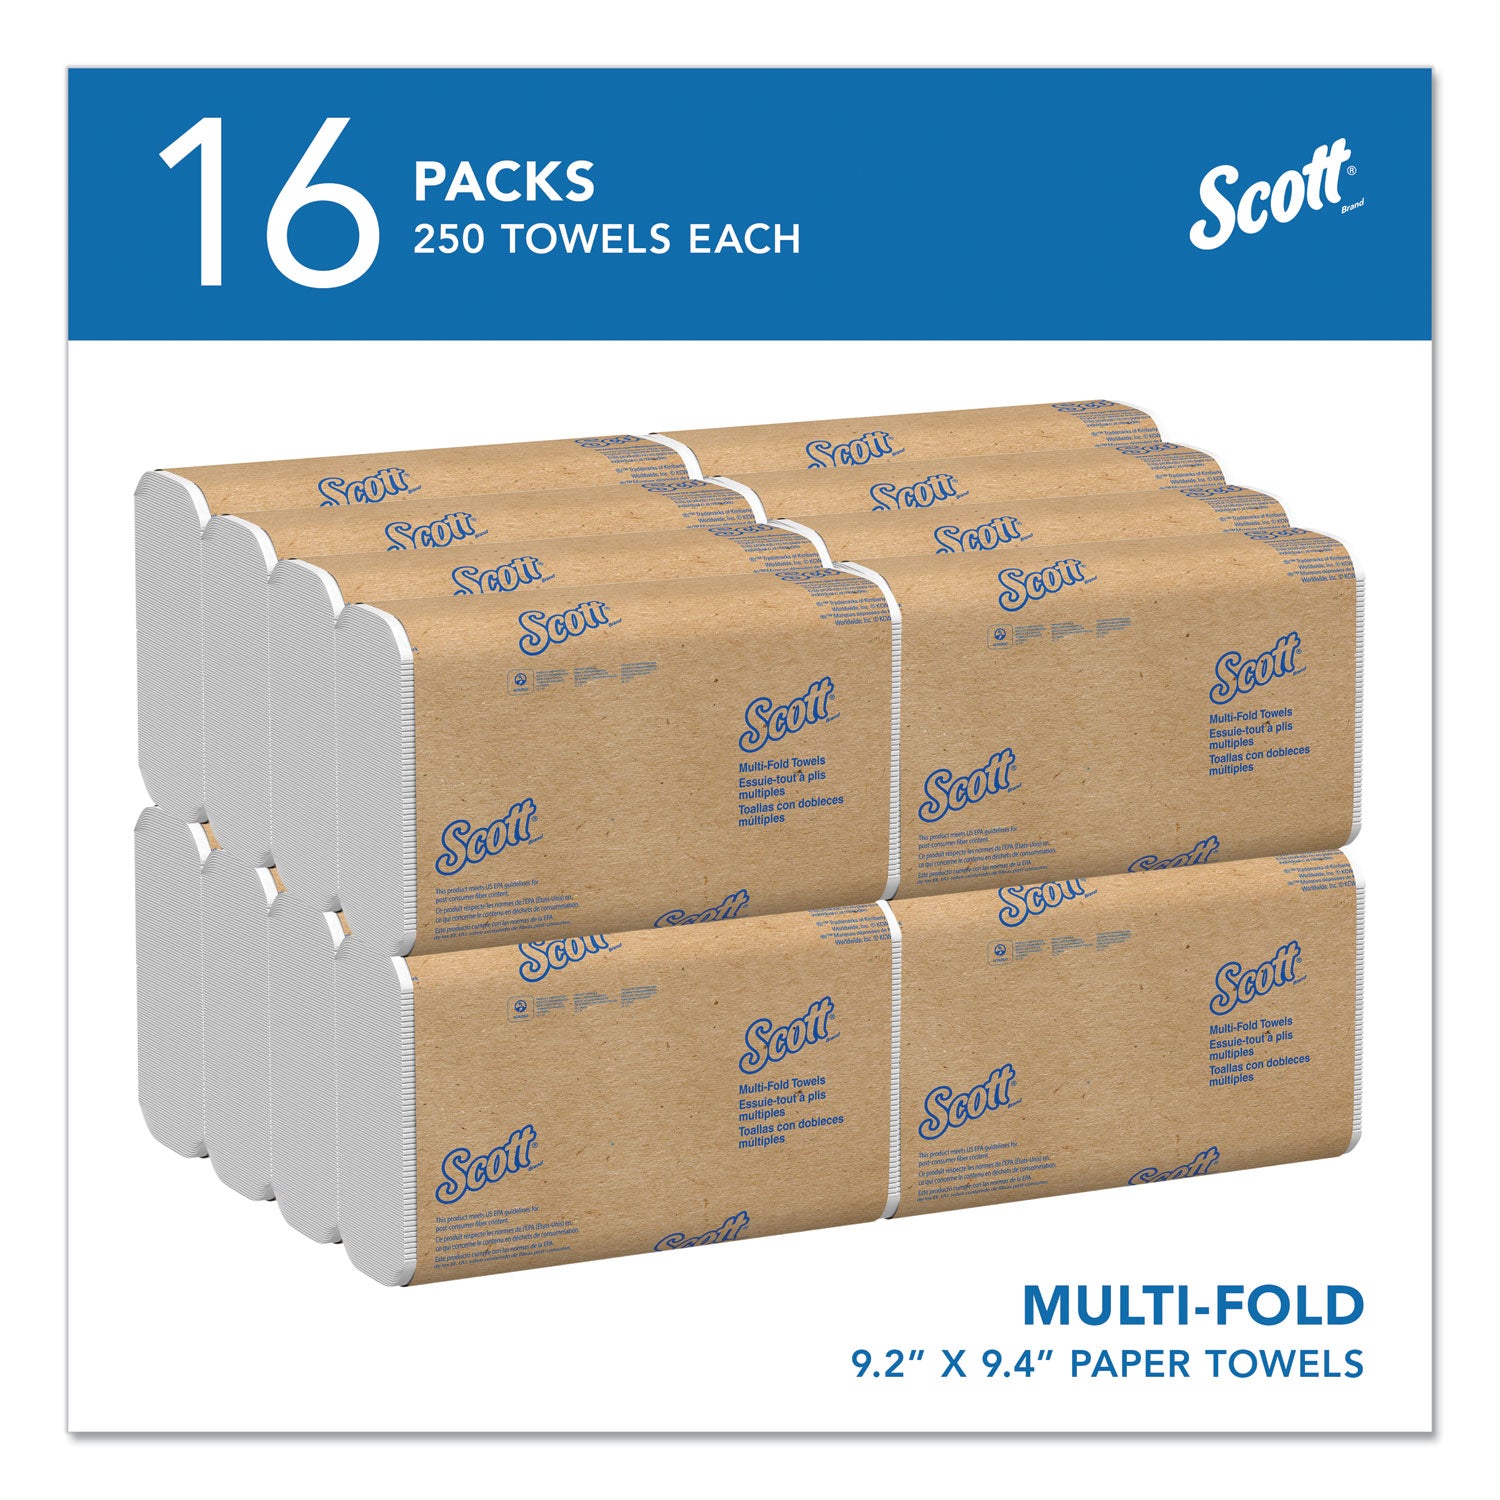 Essential Multi-Fold Towels, Absorbency Pockets, 1-Ply, 9.2 x 9.4, White, 250/Pack, 16 Packs/Carton - 